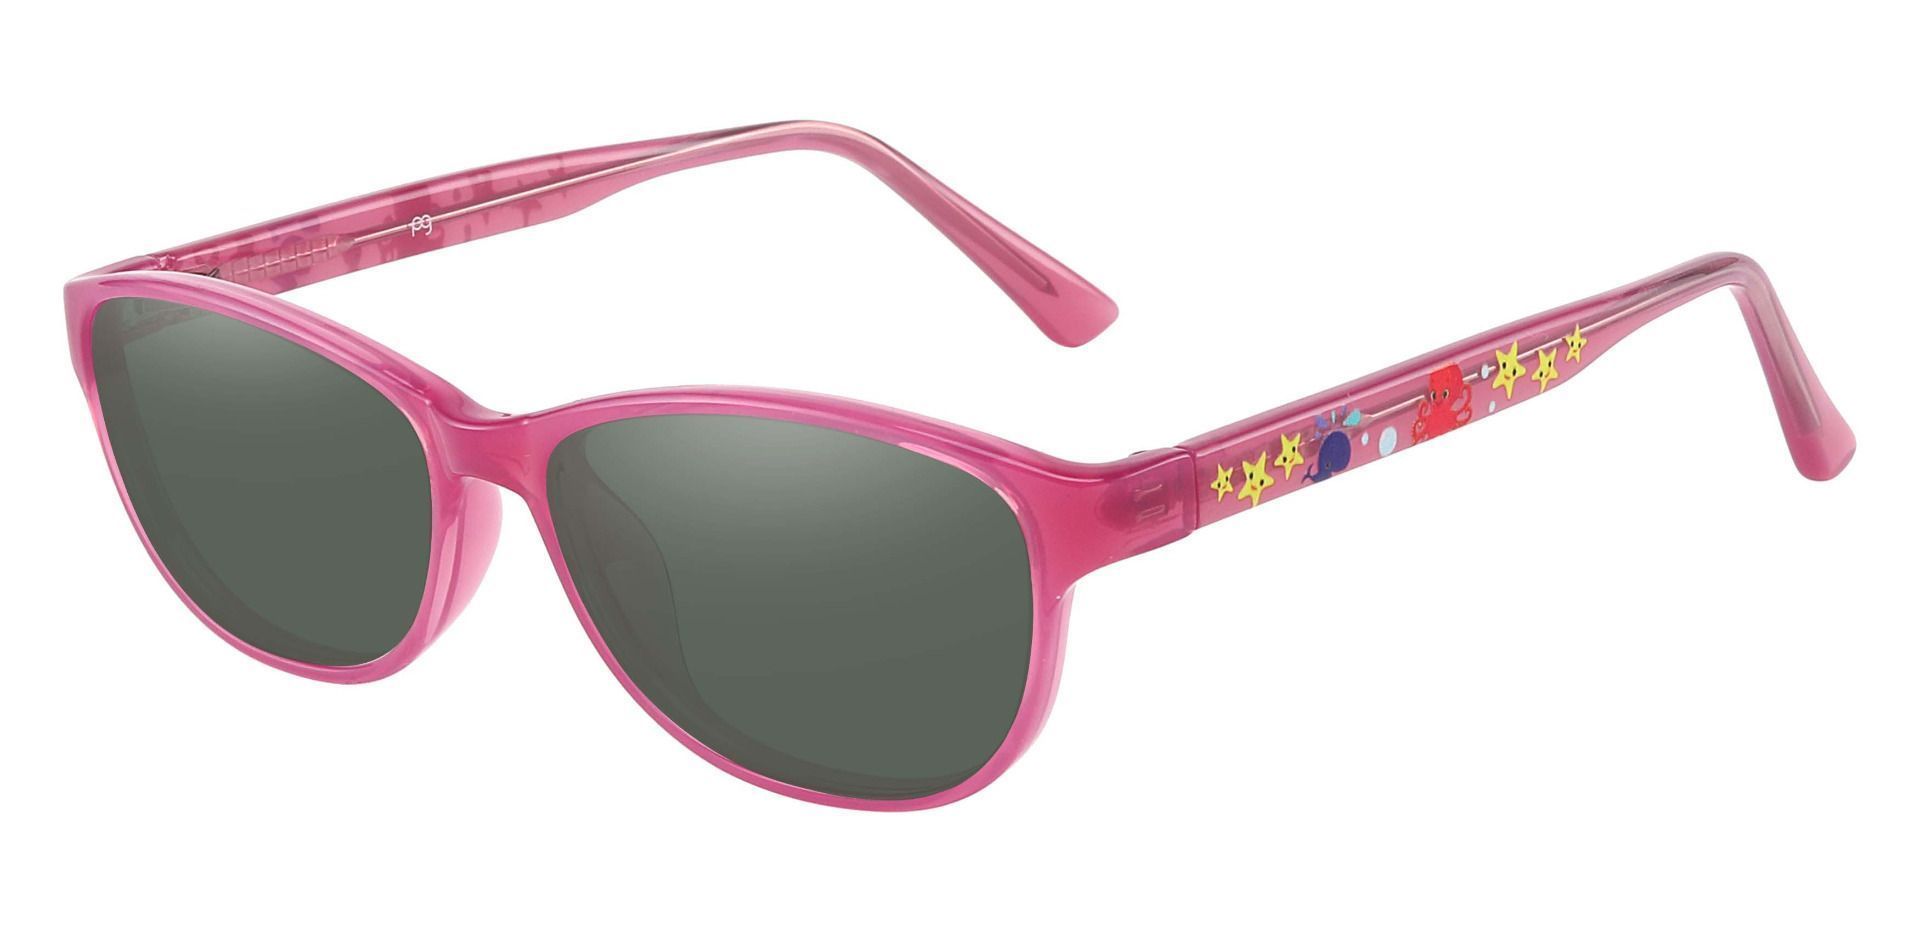 Patsy Oval Prescription Sunglasses - Pink Frame With Green Lenses